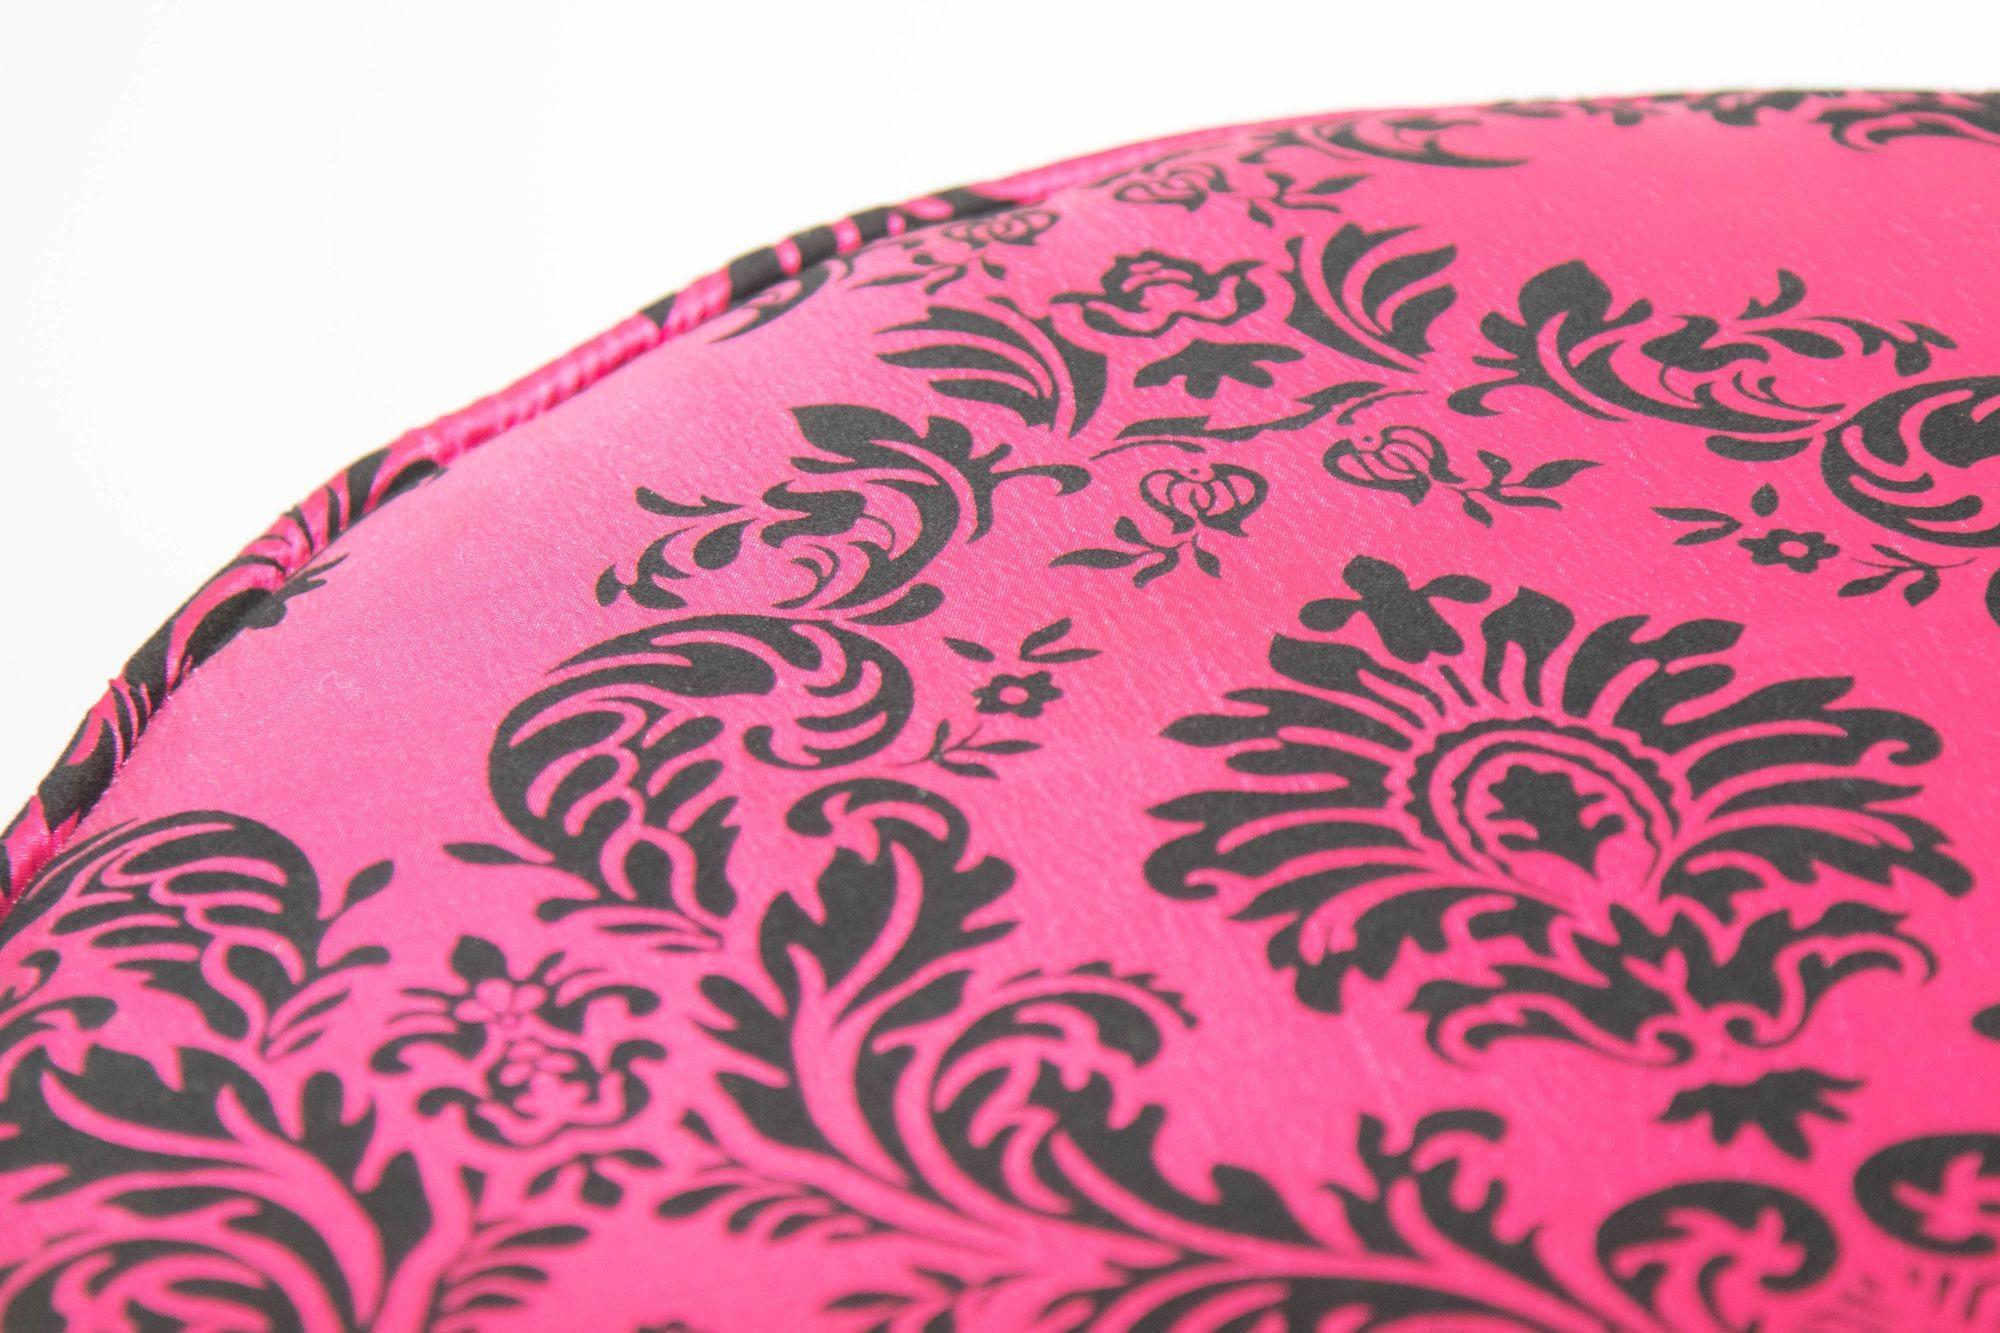 Hand-Crafted Post Modern Upholstered Moroccan Art Deco Style Pouf in Hot Fuchsia Color For Sale